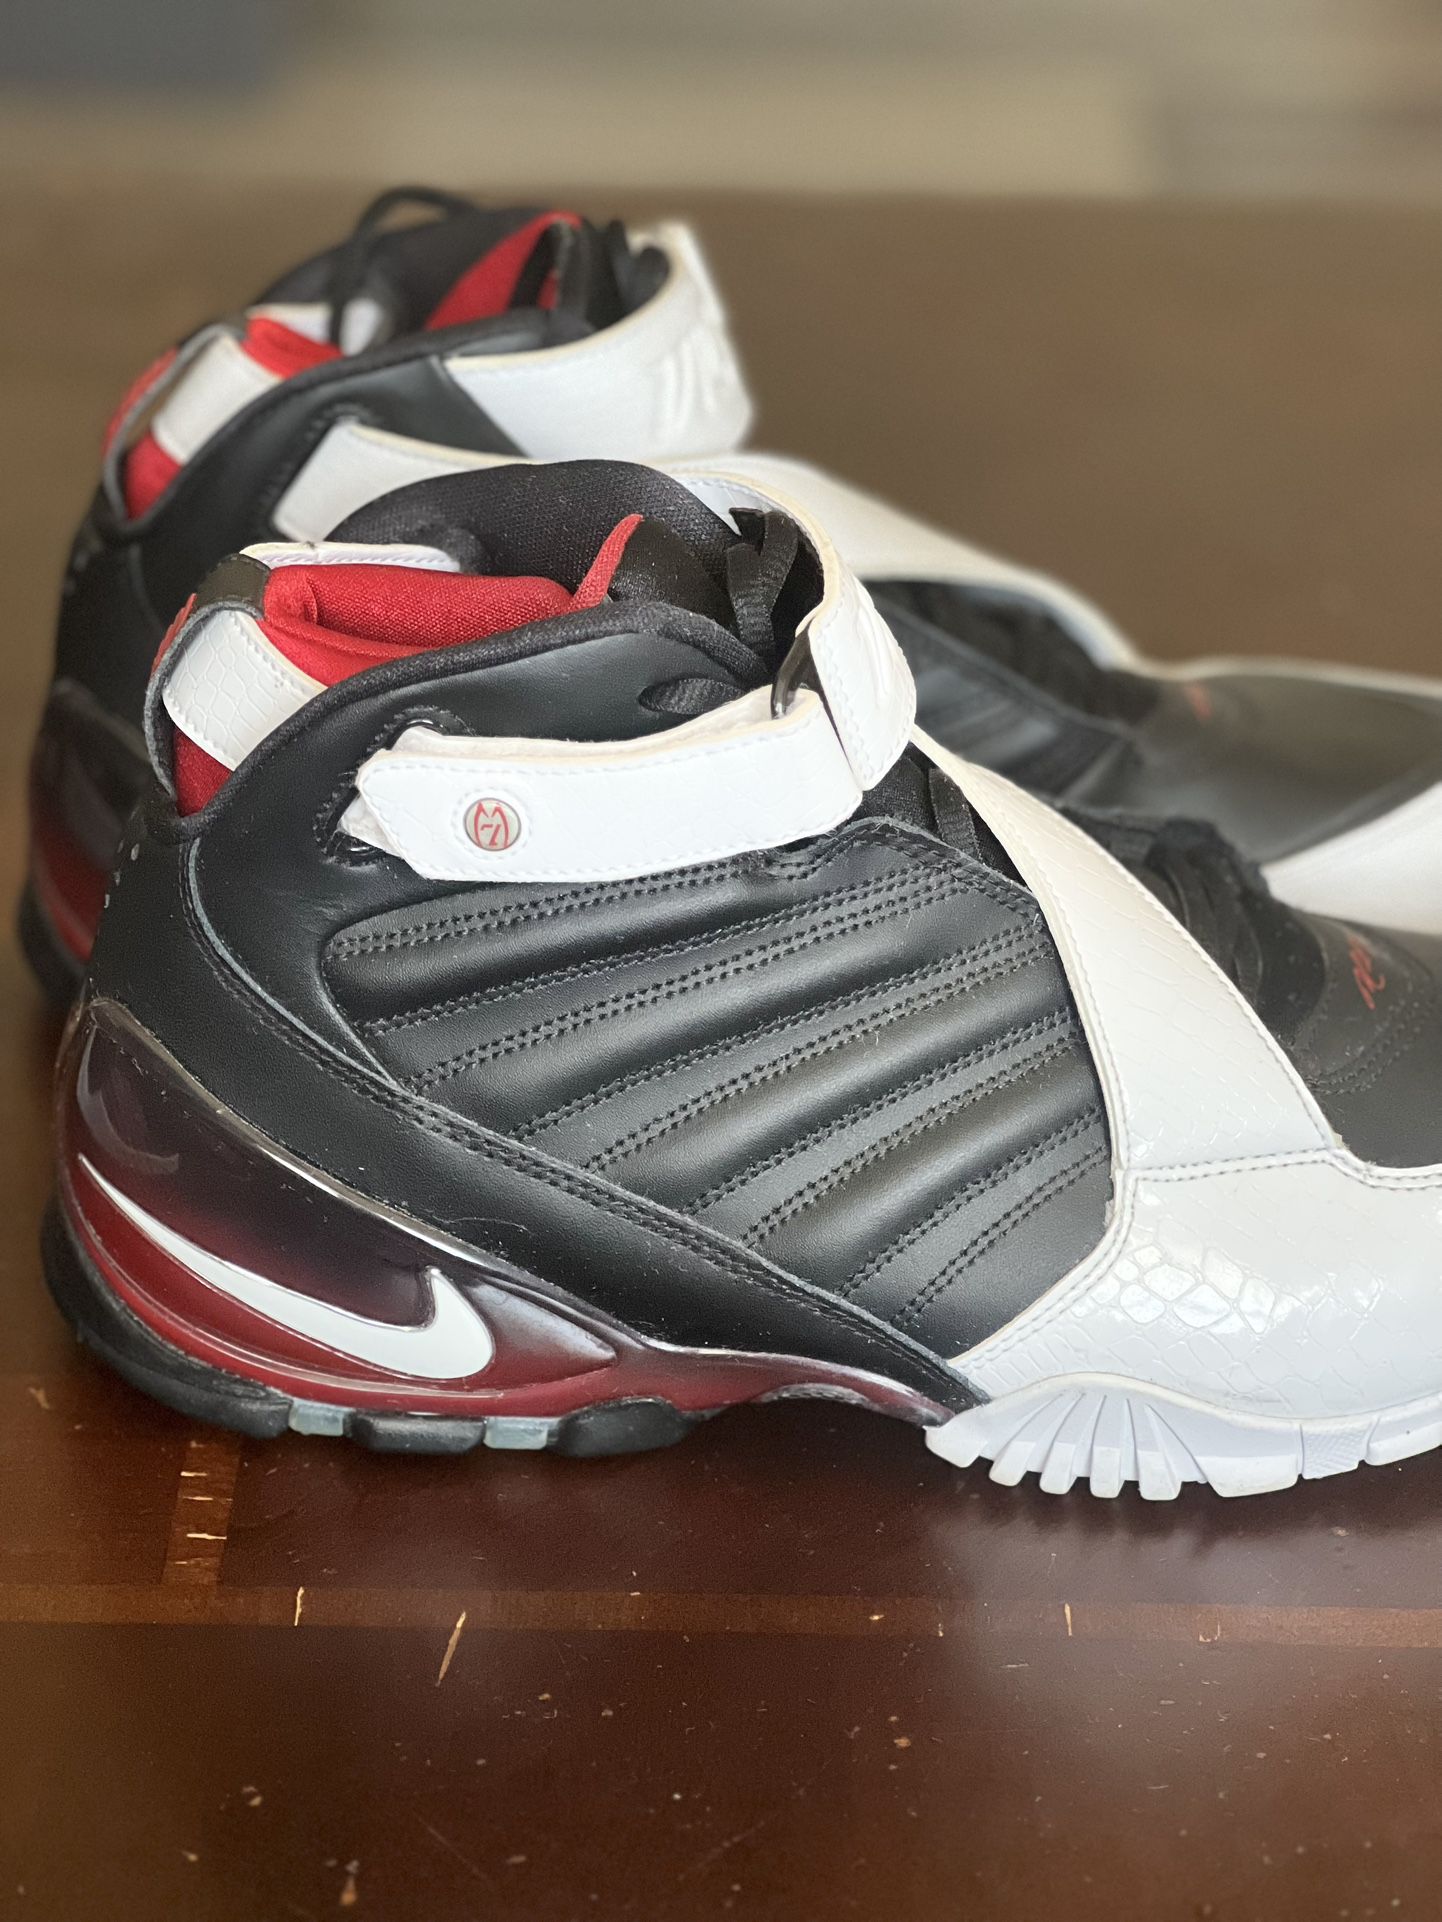 Rare Nike Mike Vick Shoes Sz 12 for Sale in Santa Fe County, NM - OfferUp